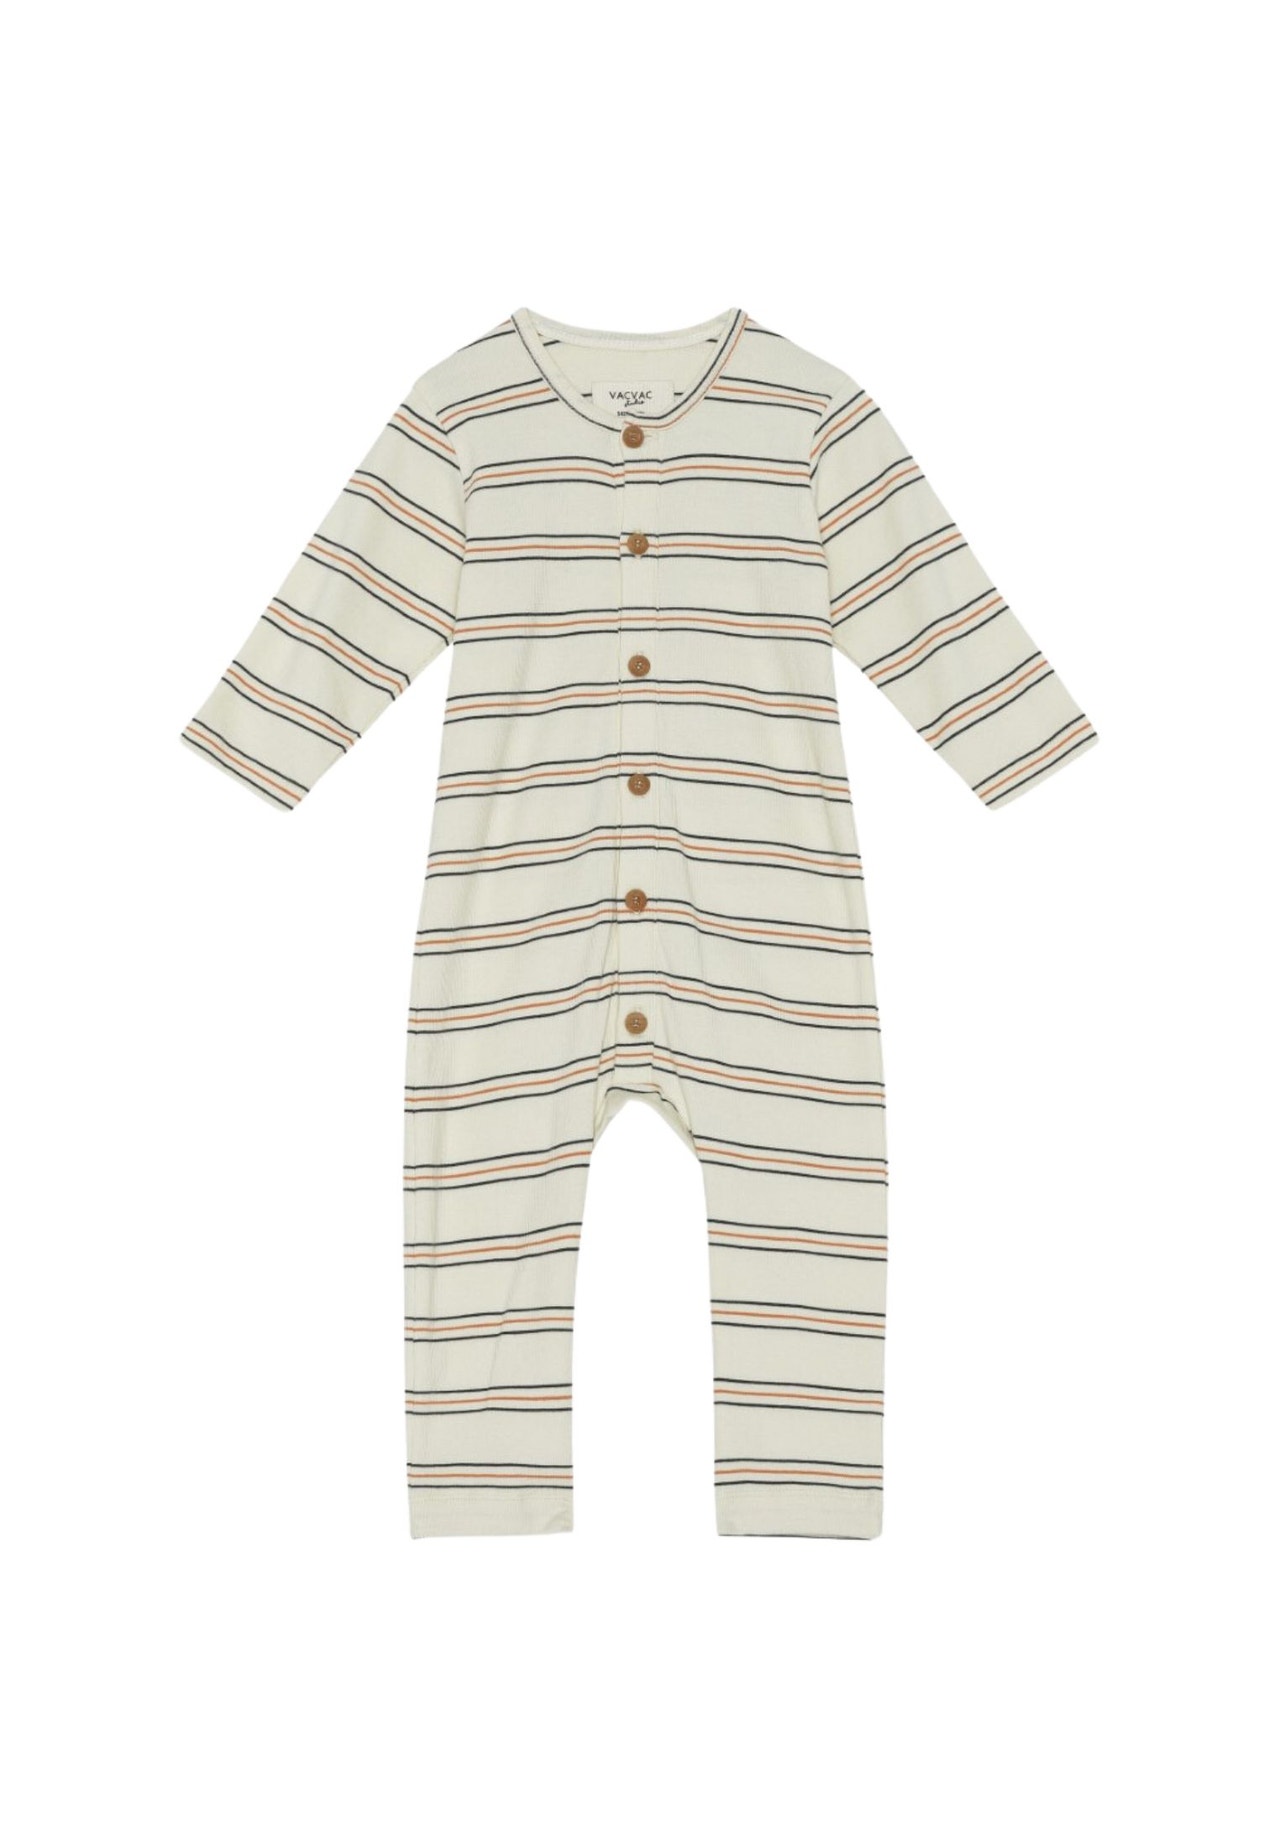 MAMA.LICIOUS Baby-sparkdräkt -Seed Pearl stripes - 99999962